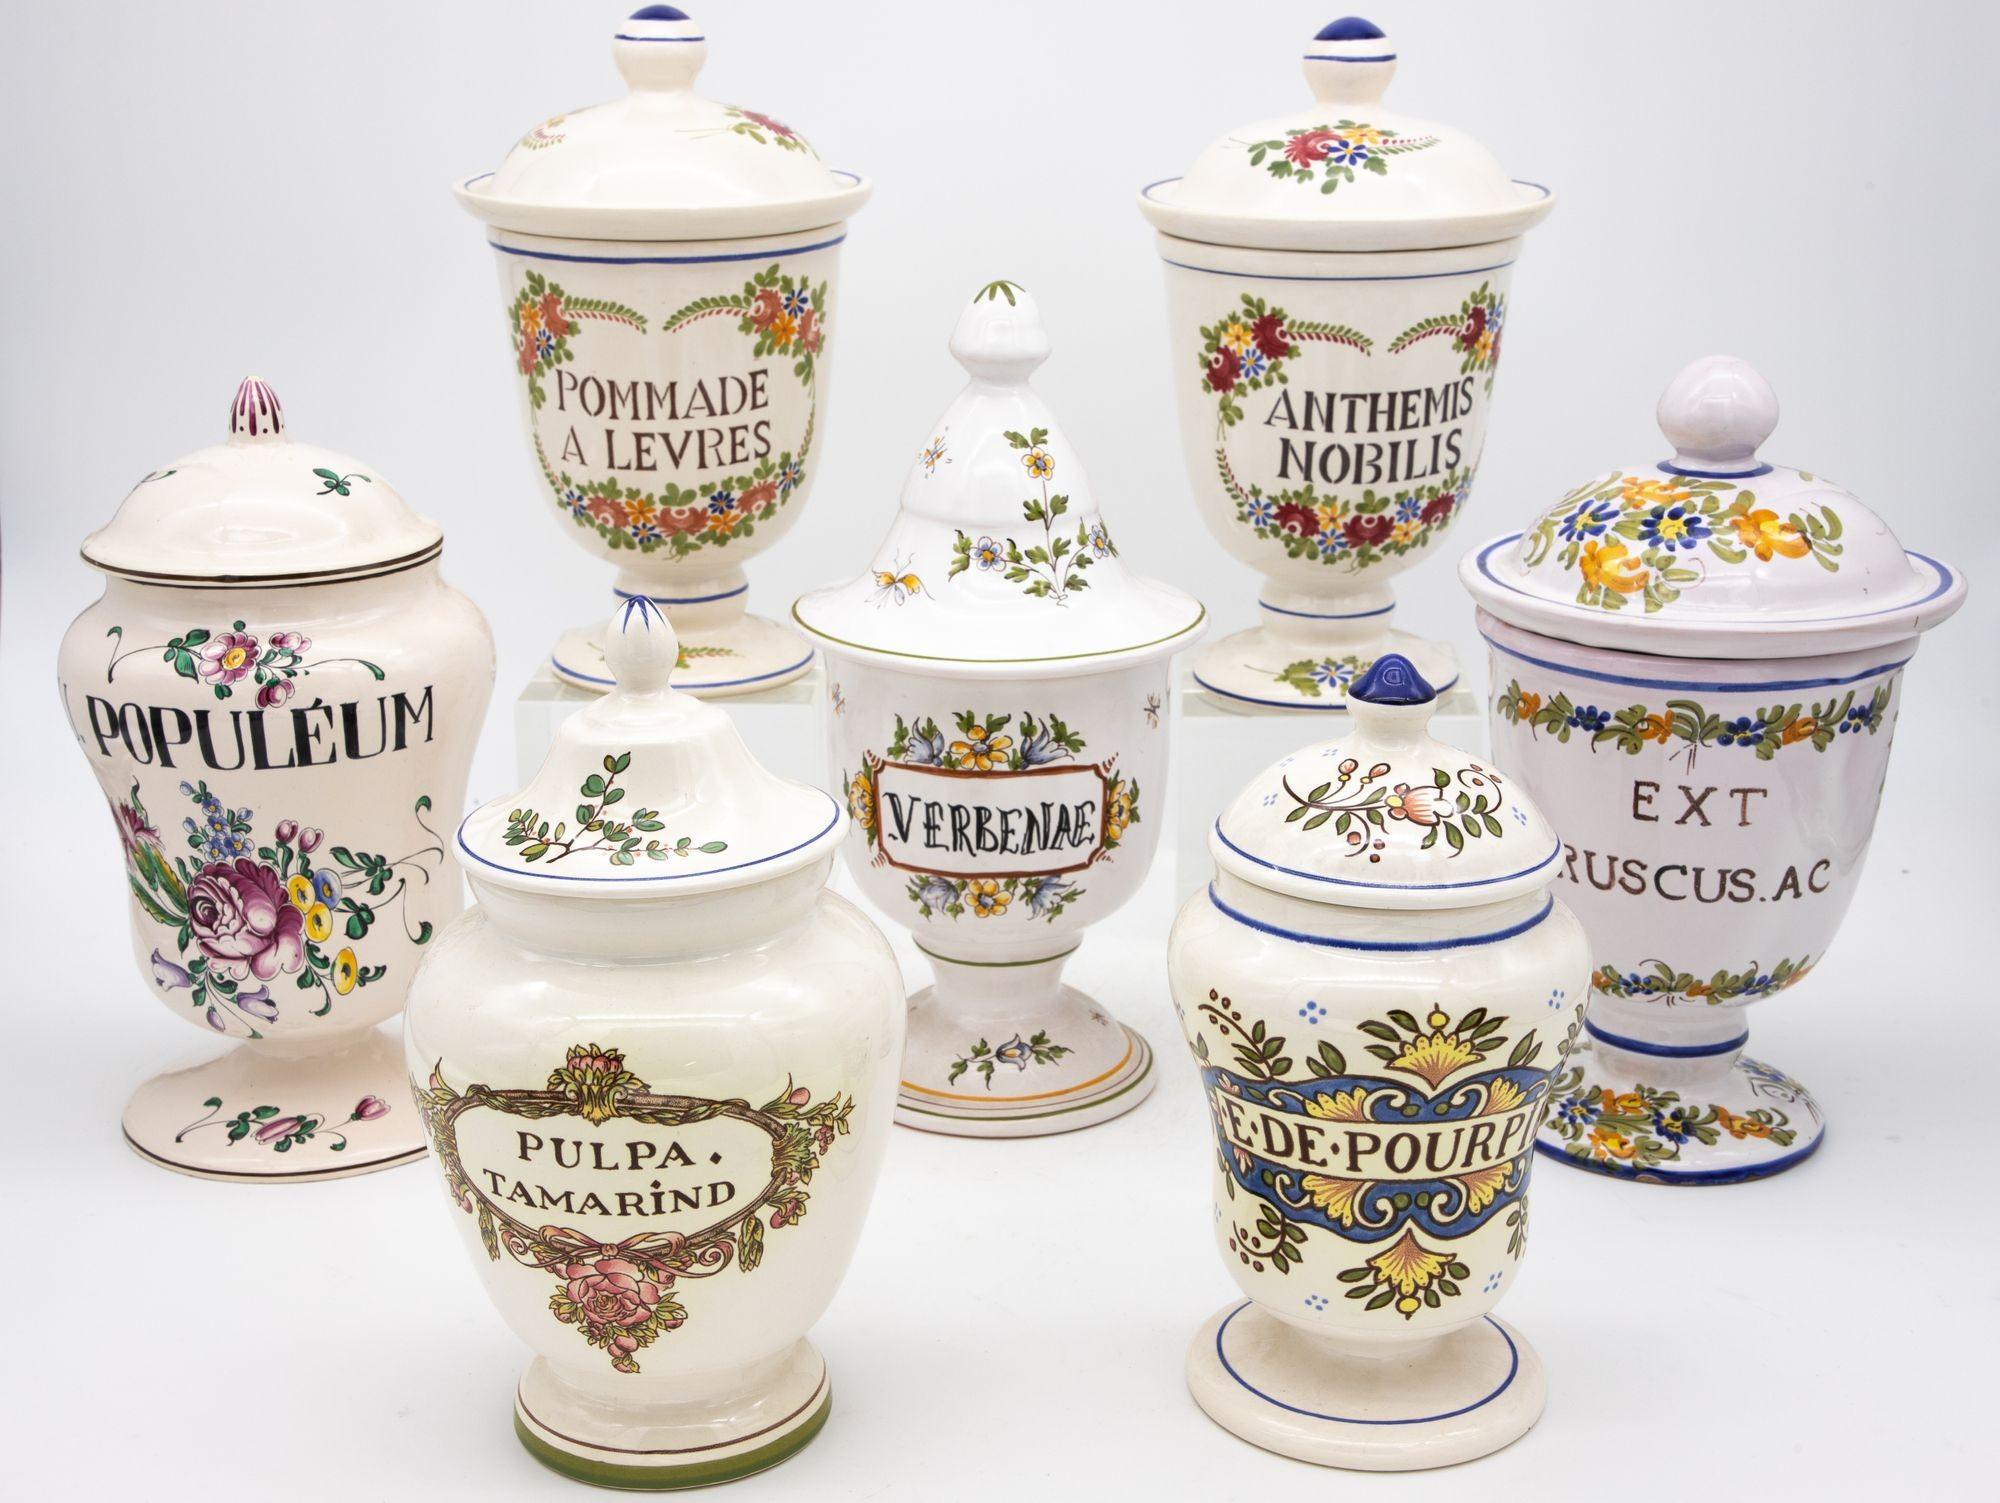 A collection of seven apothecary jars in a Provence style. Each painted apothecary or pharmacy jar has a name and unique design painted on it. The collection is early 20th century and each has its lid. The smallest measures 4.5